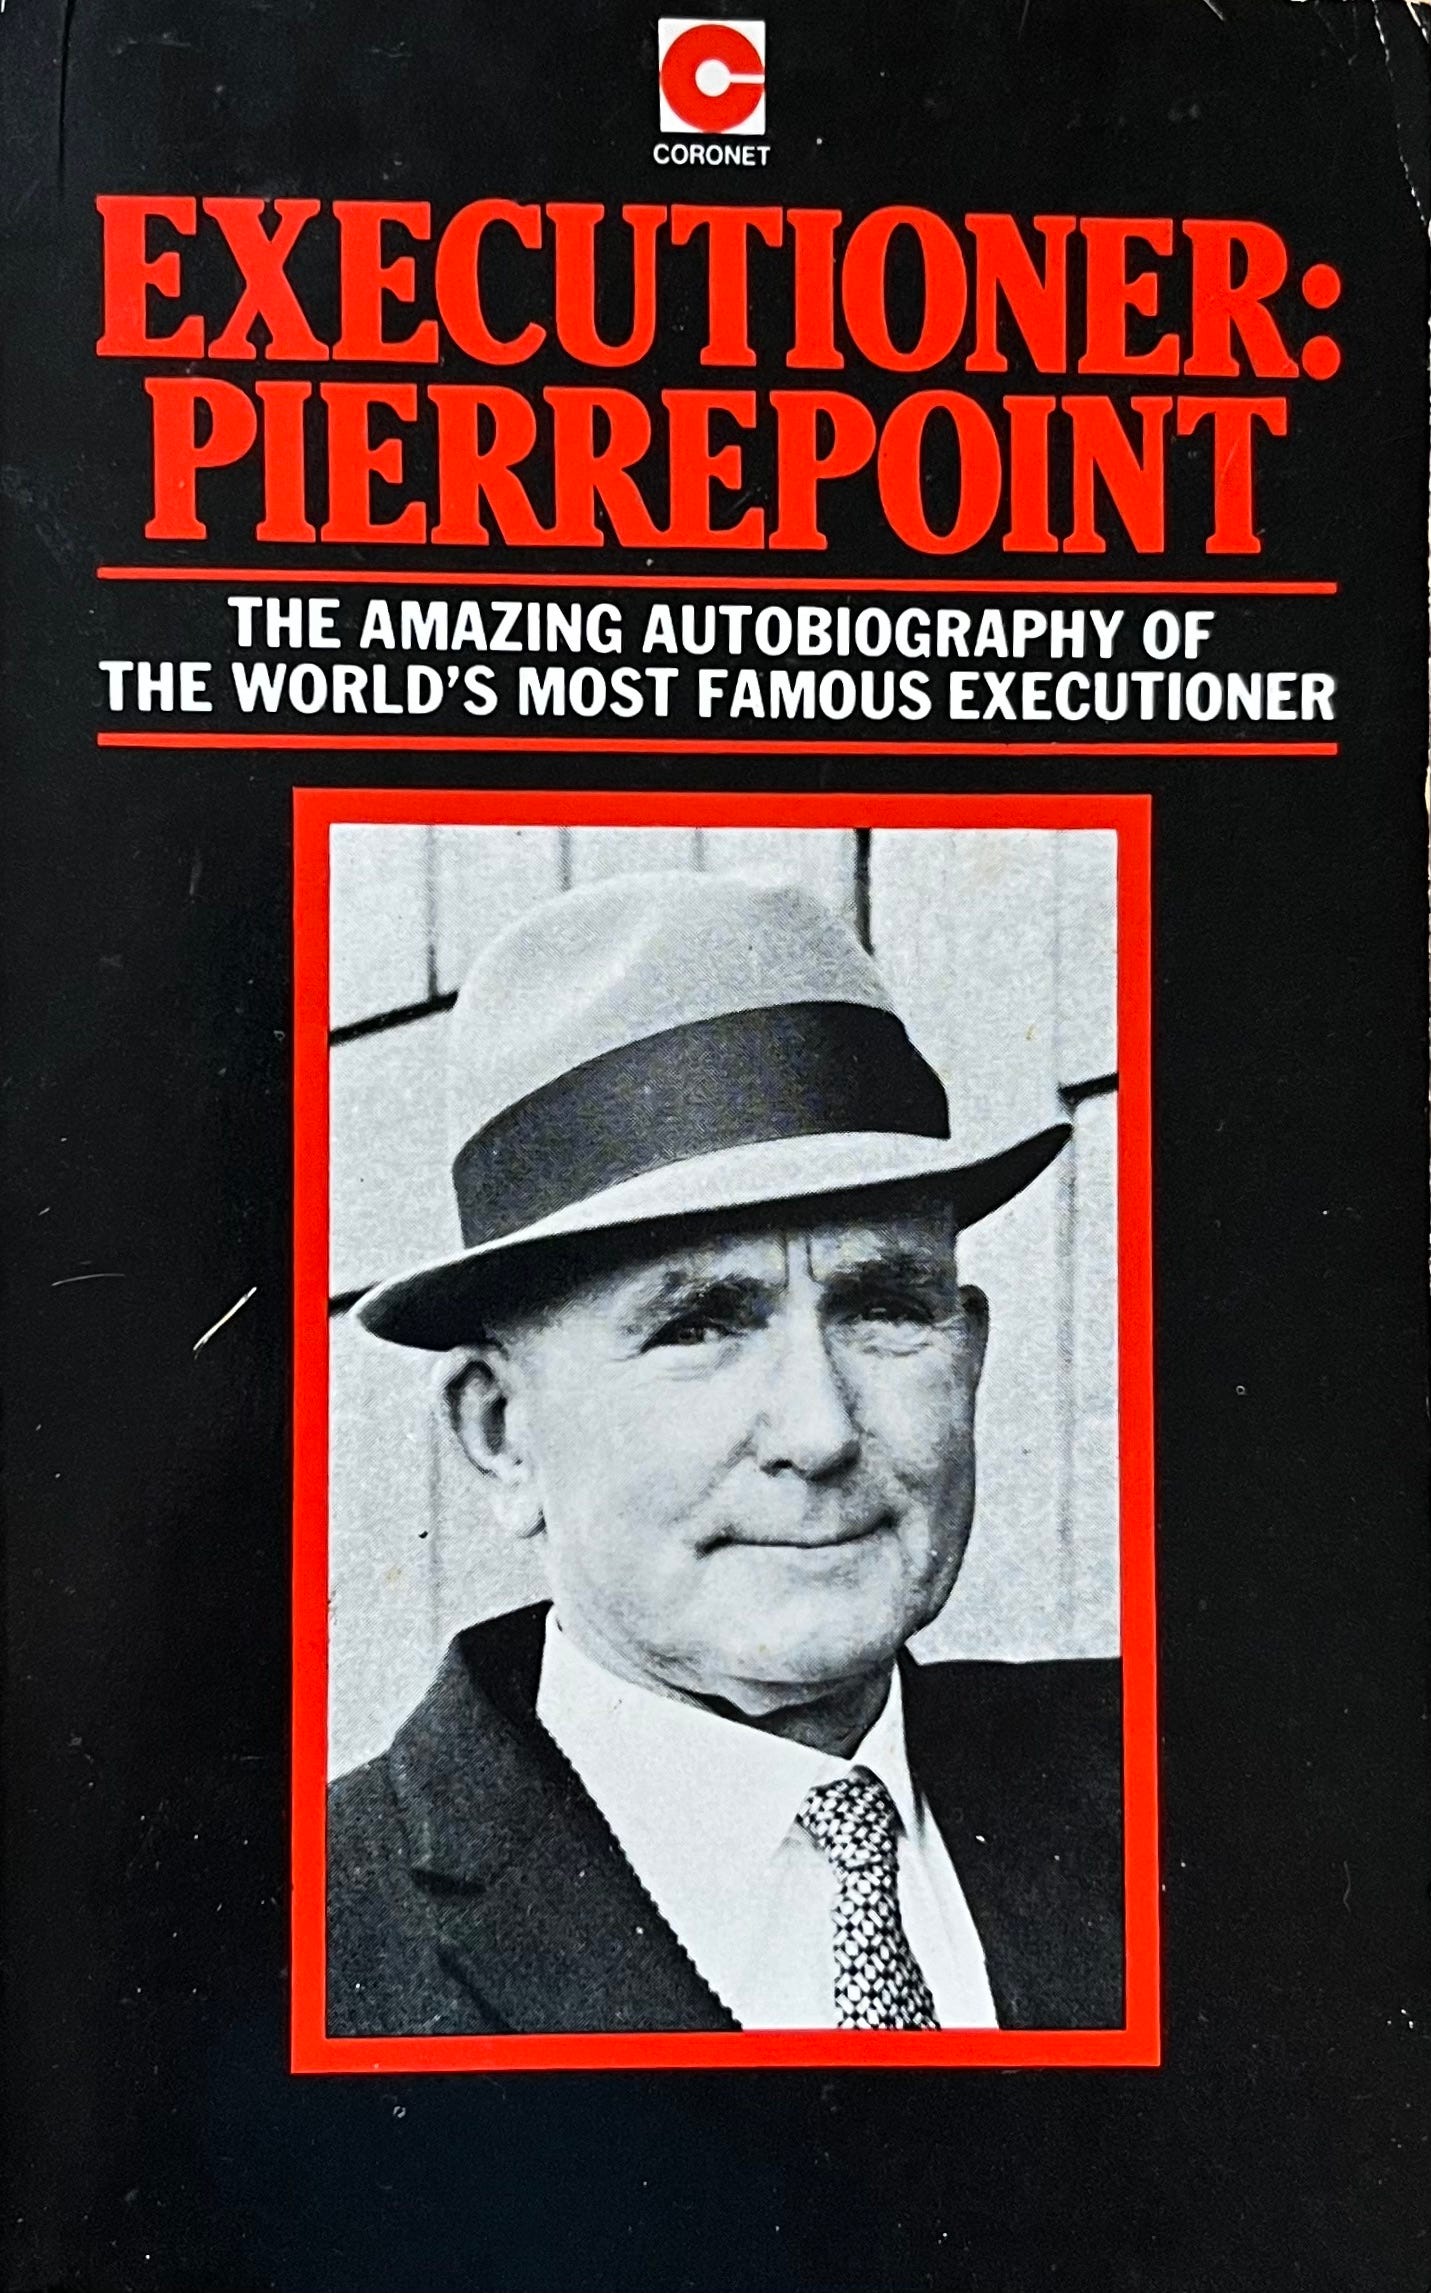 Executioner: Pierrepoint book cover